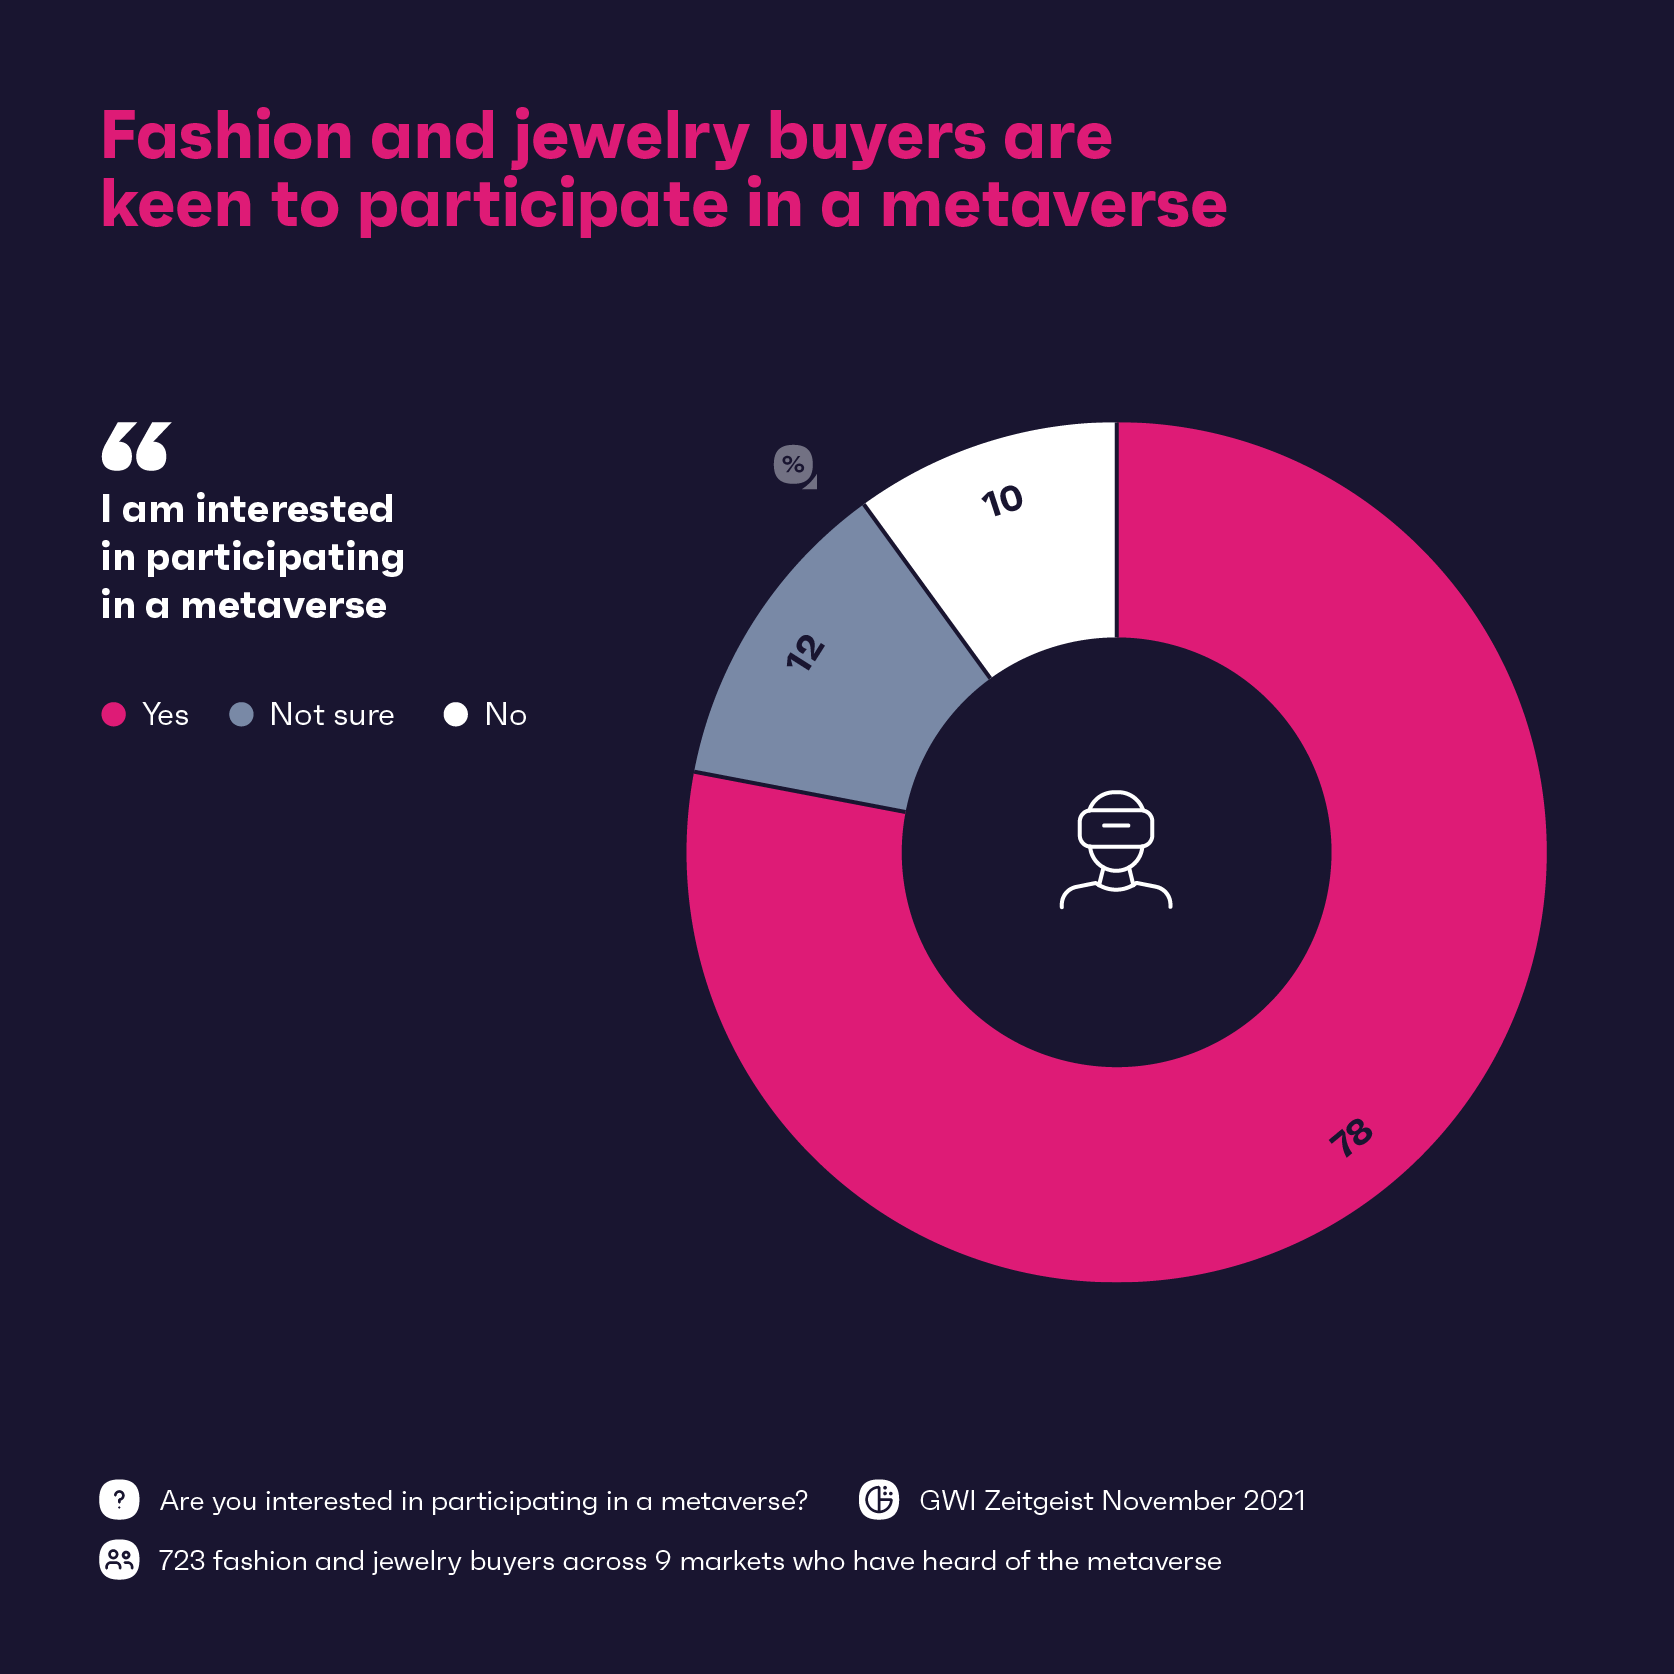 Chart showing percentage of fashion and jewelry buyers interested in the metaverse